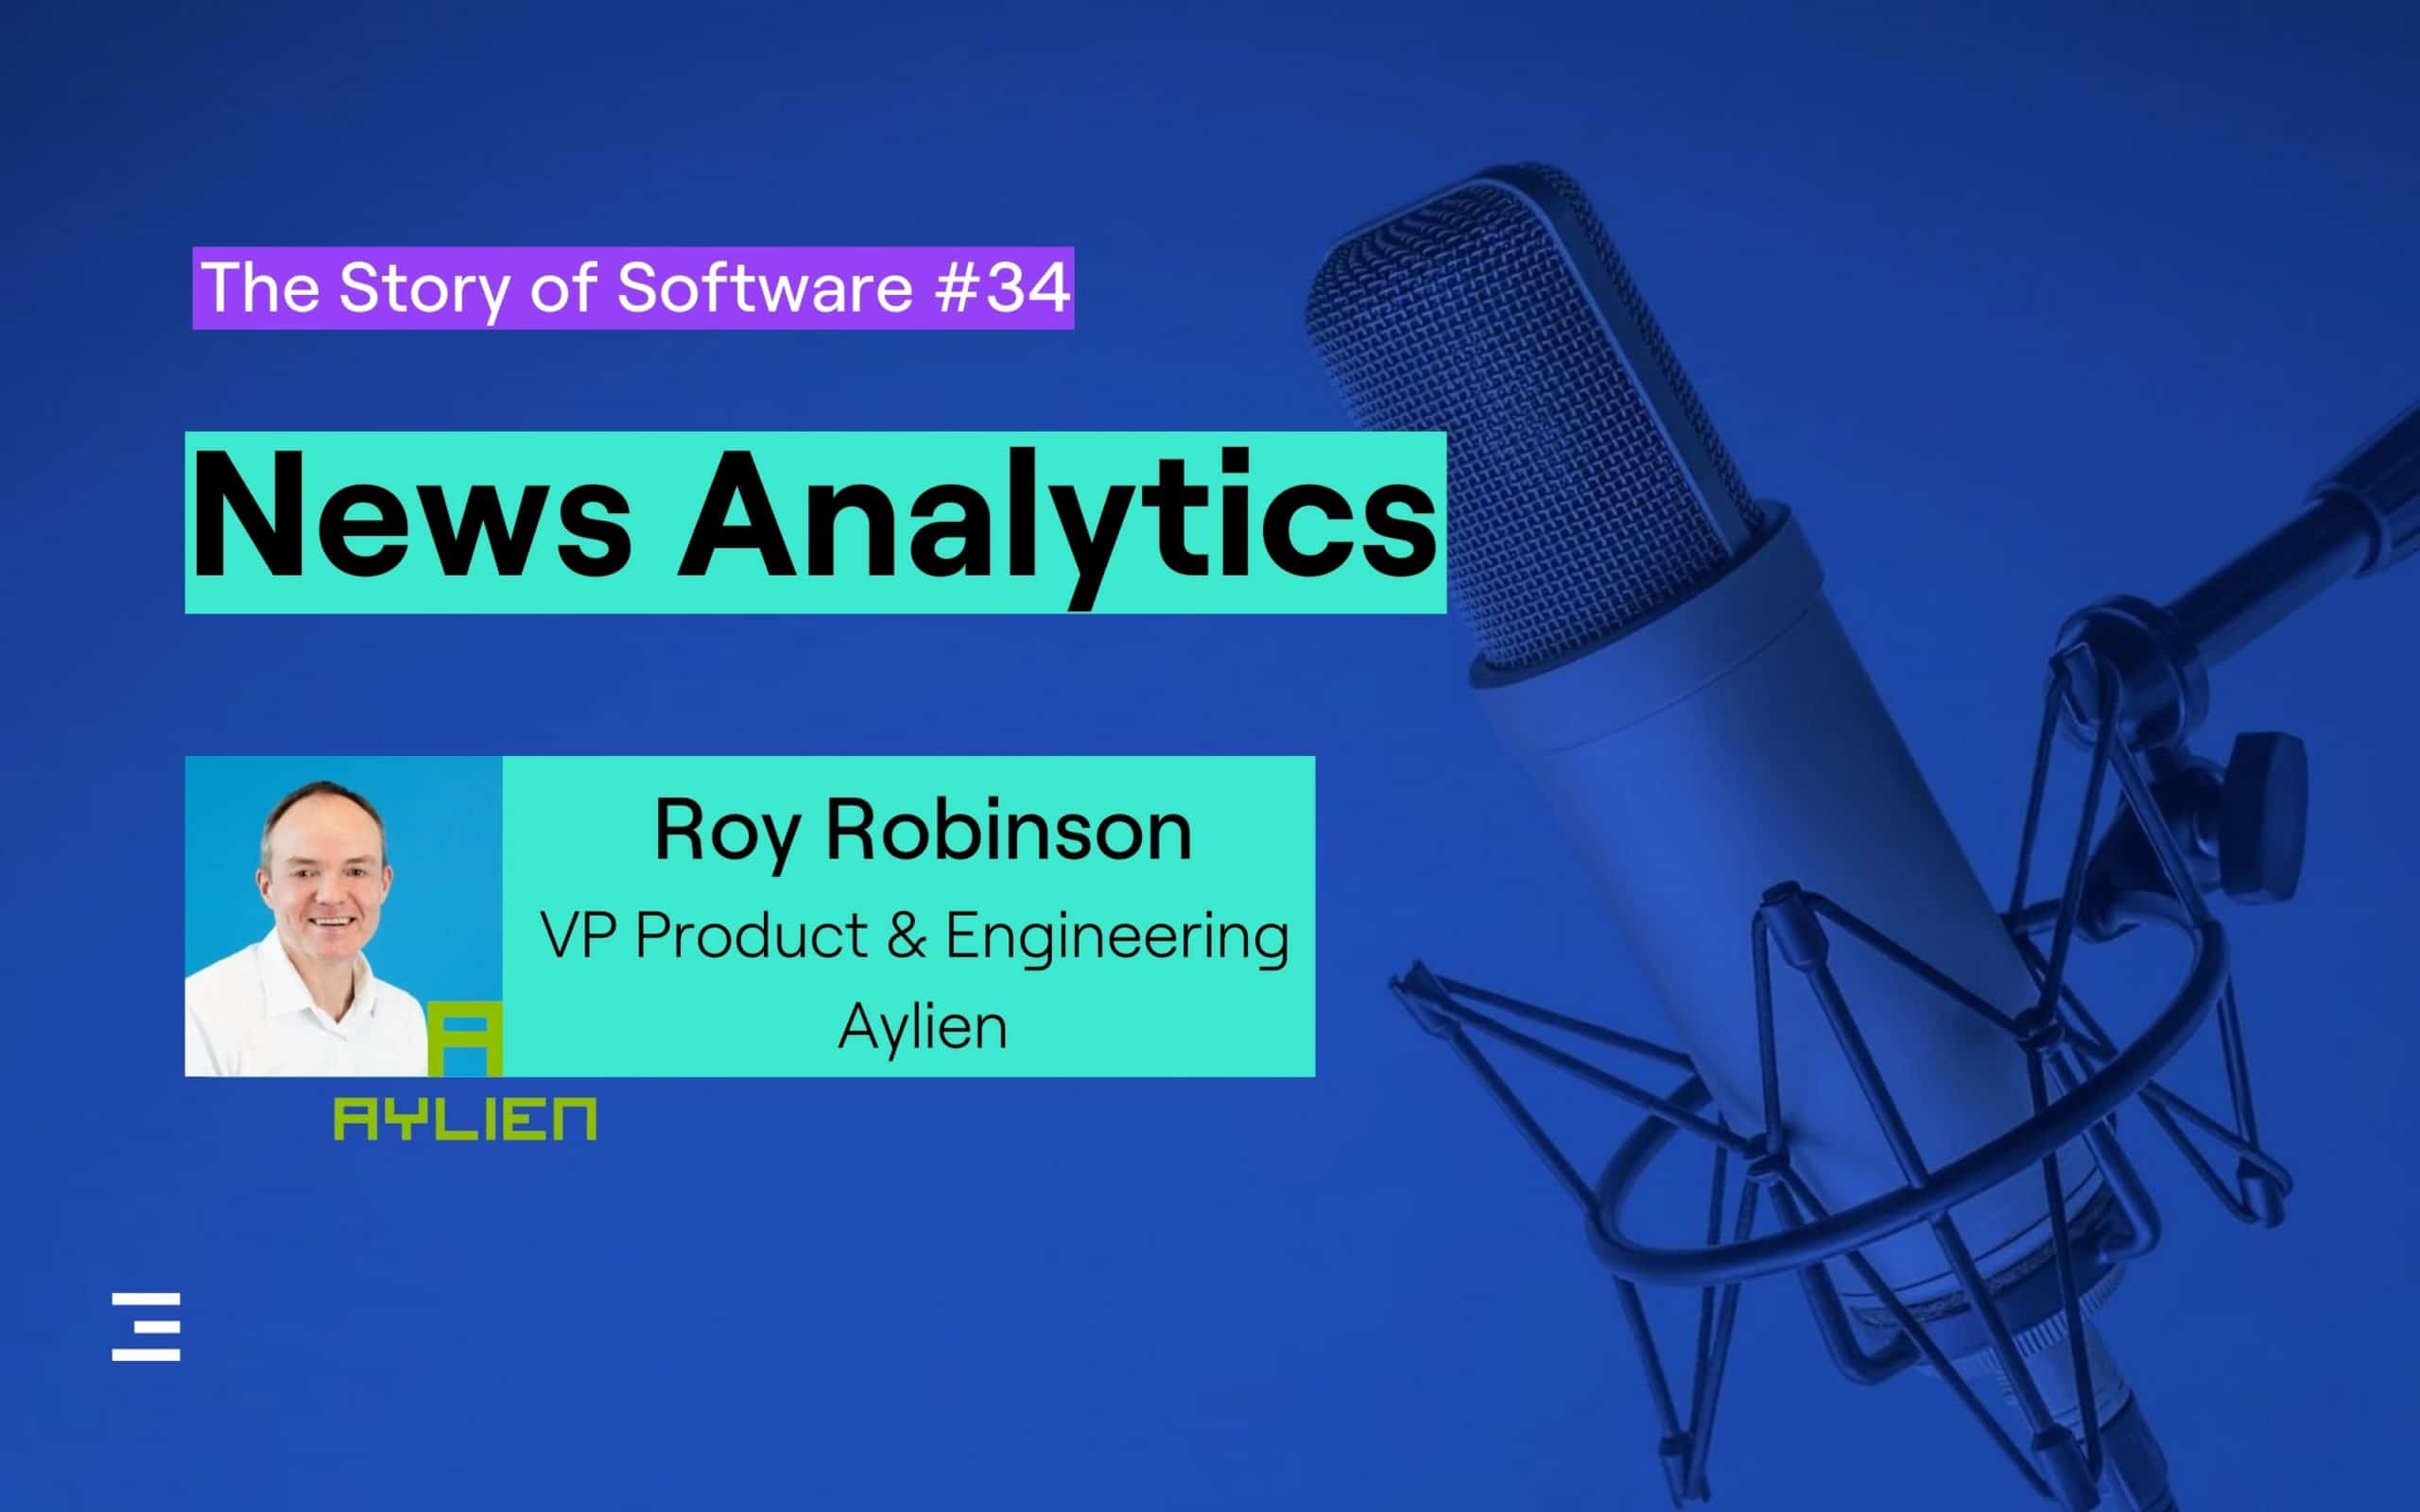 story of software podcast episode on news analytics